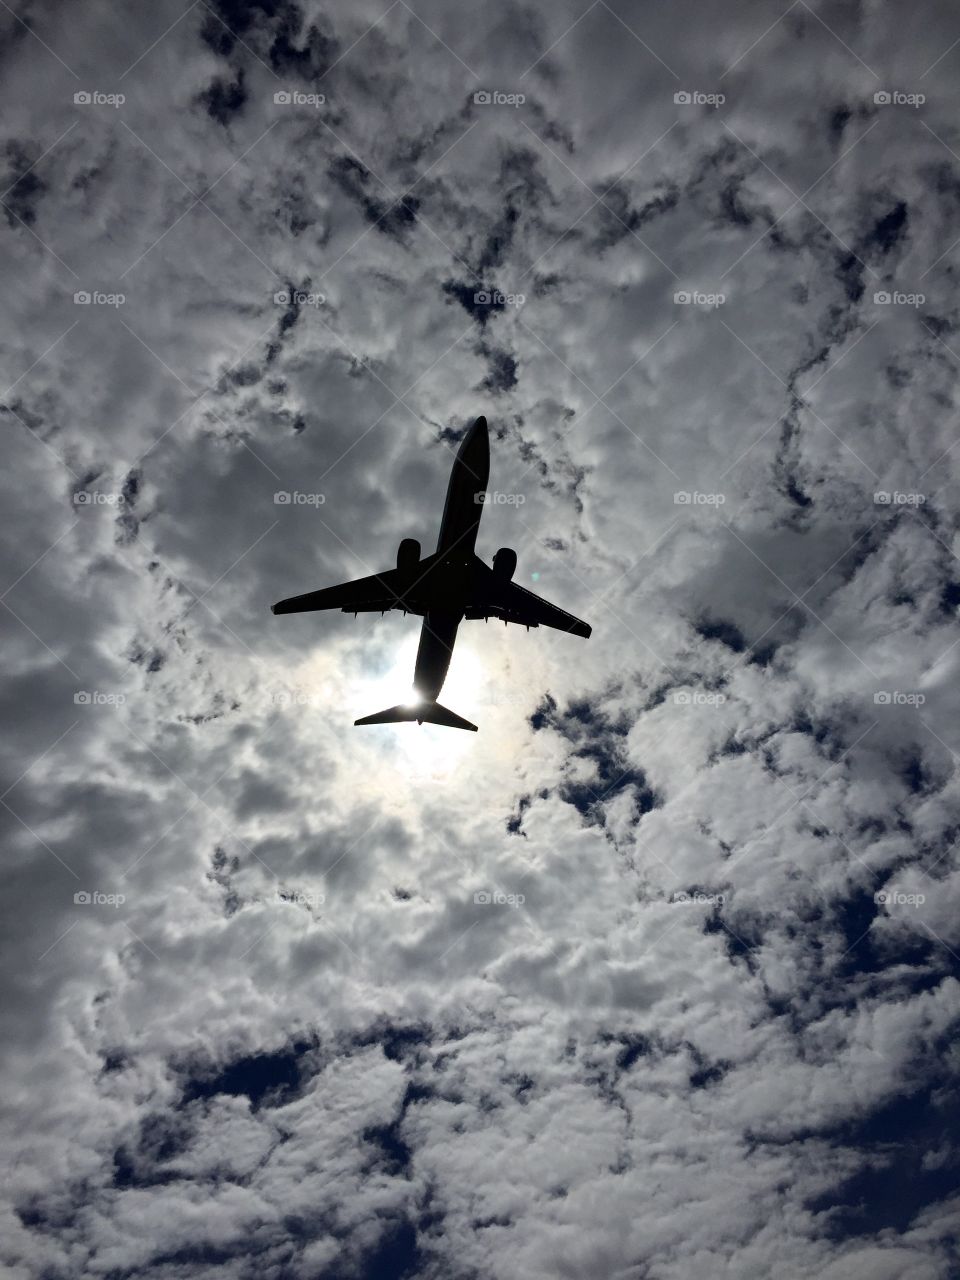 Airplane. Silhouette of a passenger plane